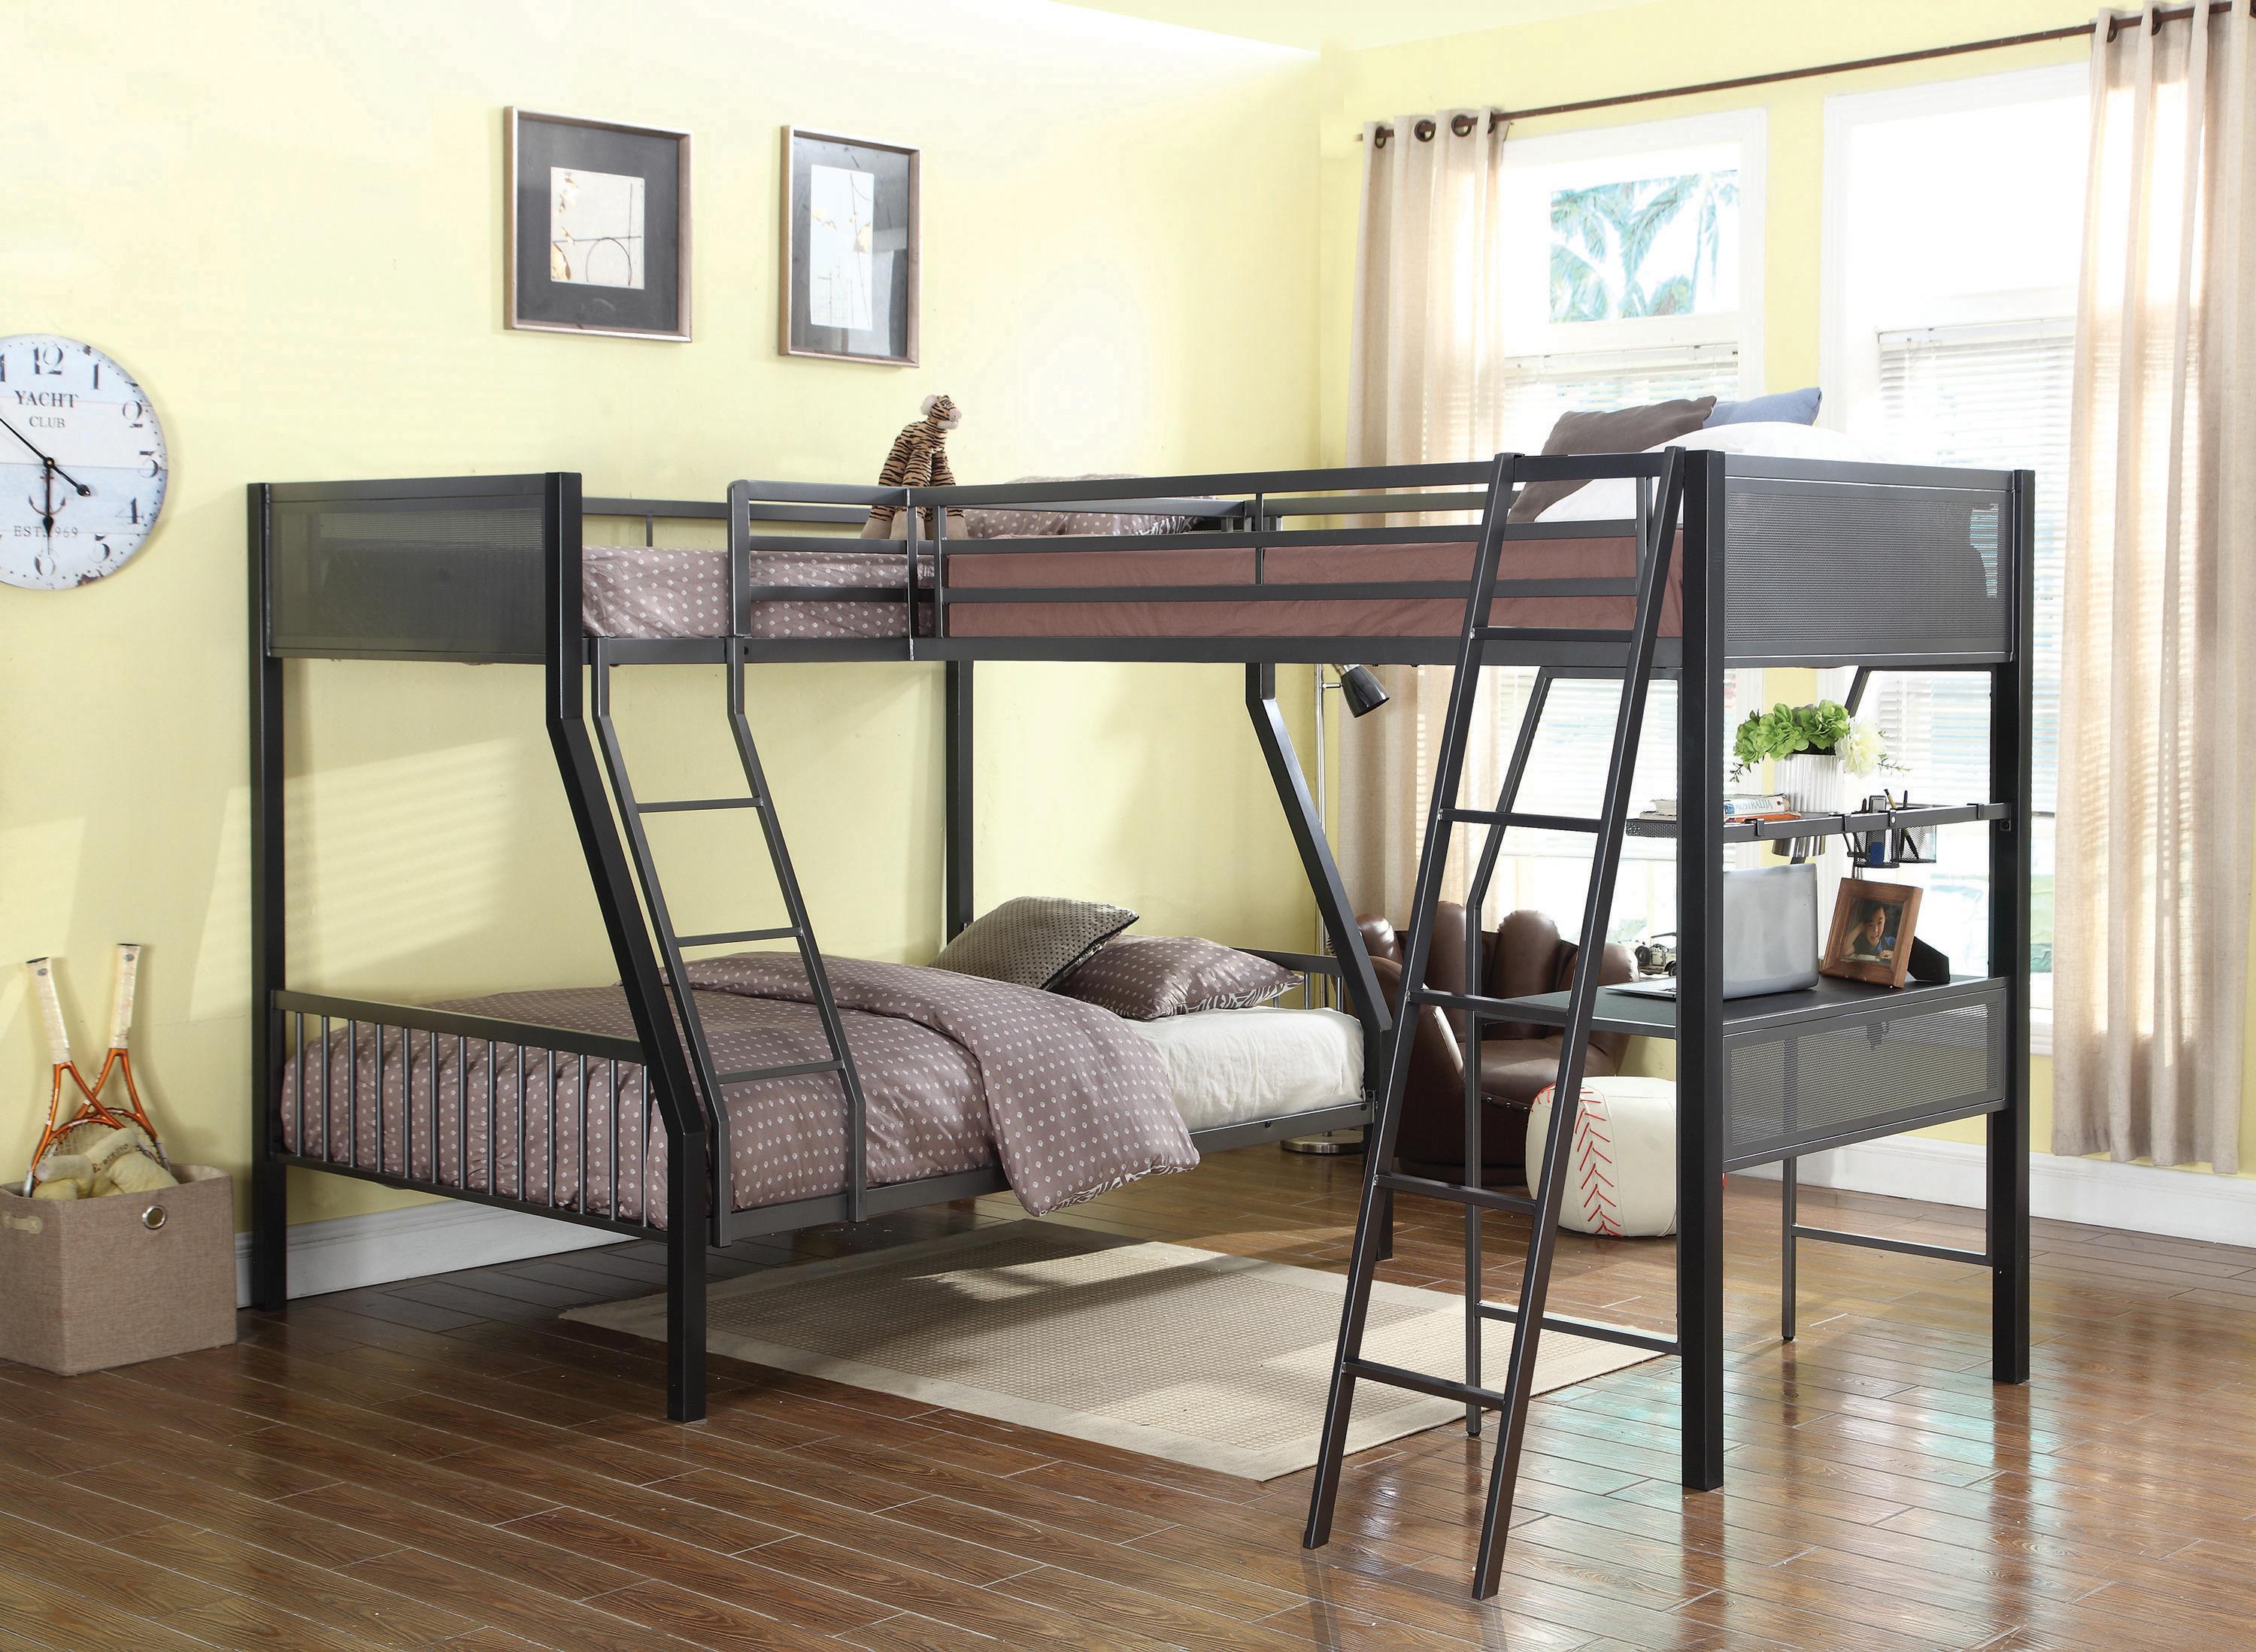 Transitional Bunk Bed Set 460391-S2 Meyers 460391-S2 in Black 